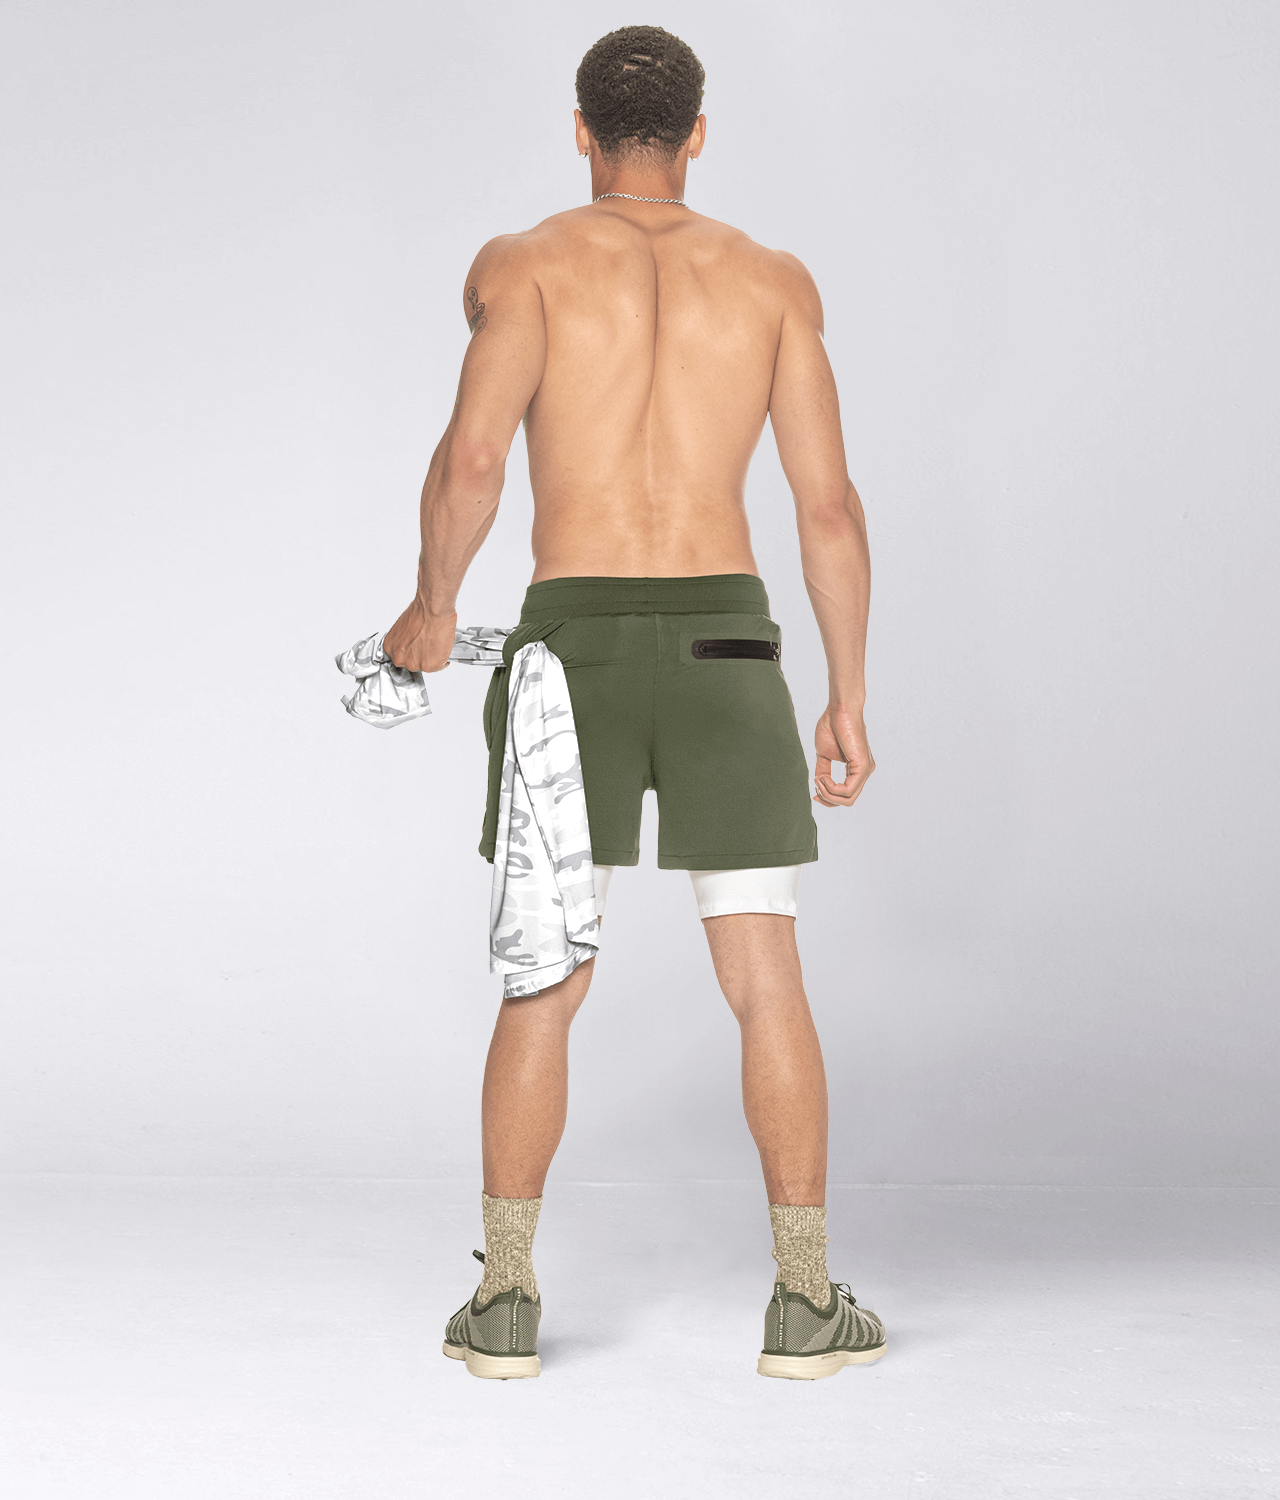 Men's 2-in-1 Workout Running Gym Shorts Lightweight with Towel Loop & 4  Pockets